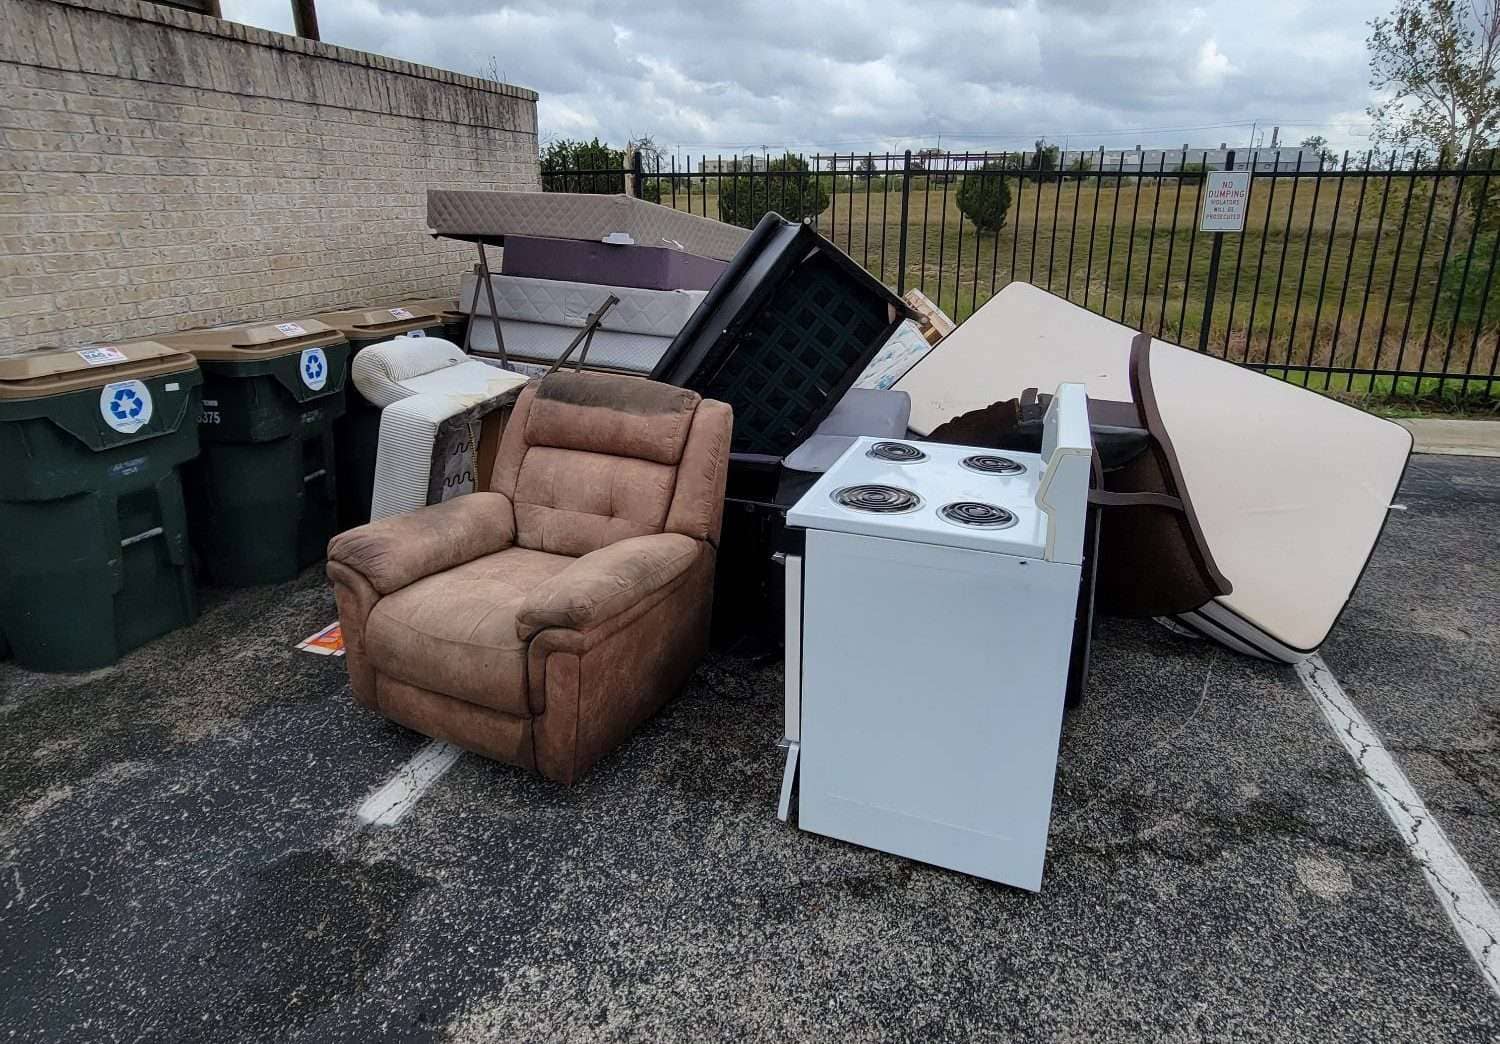 bulk junk couch recliner appliance by dumpster that needs removal in Buda